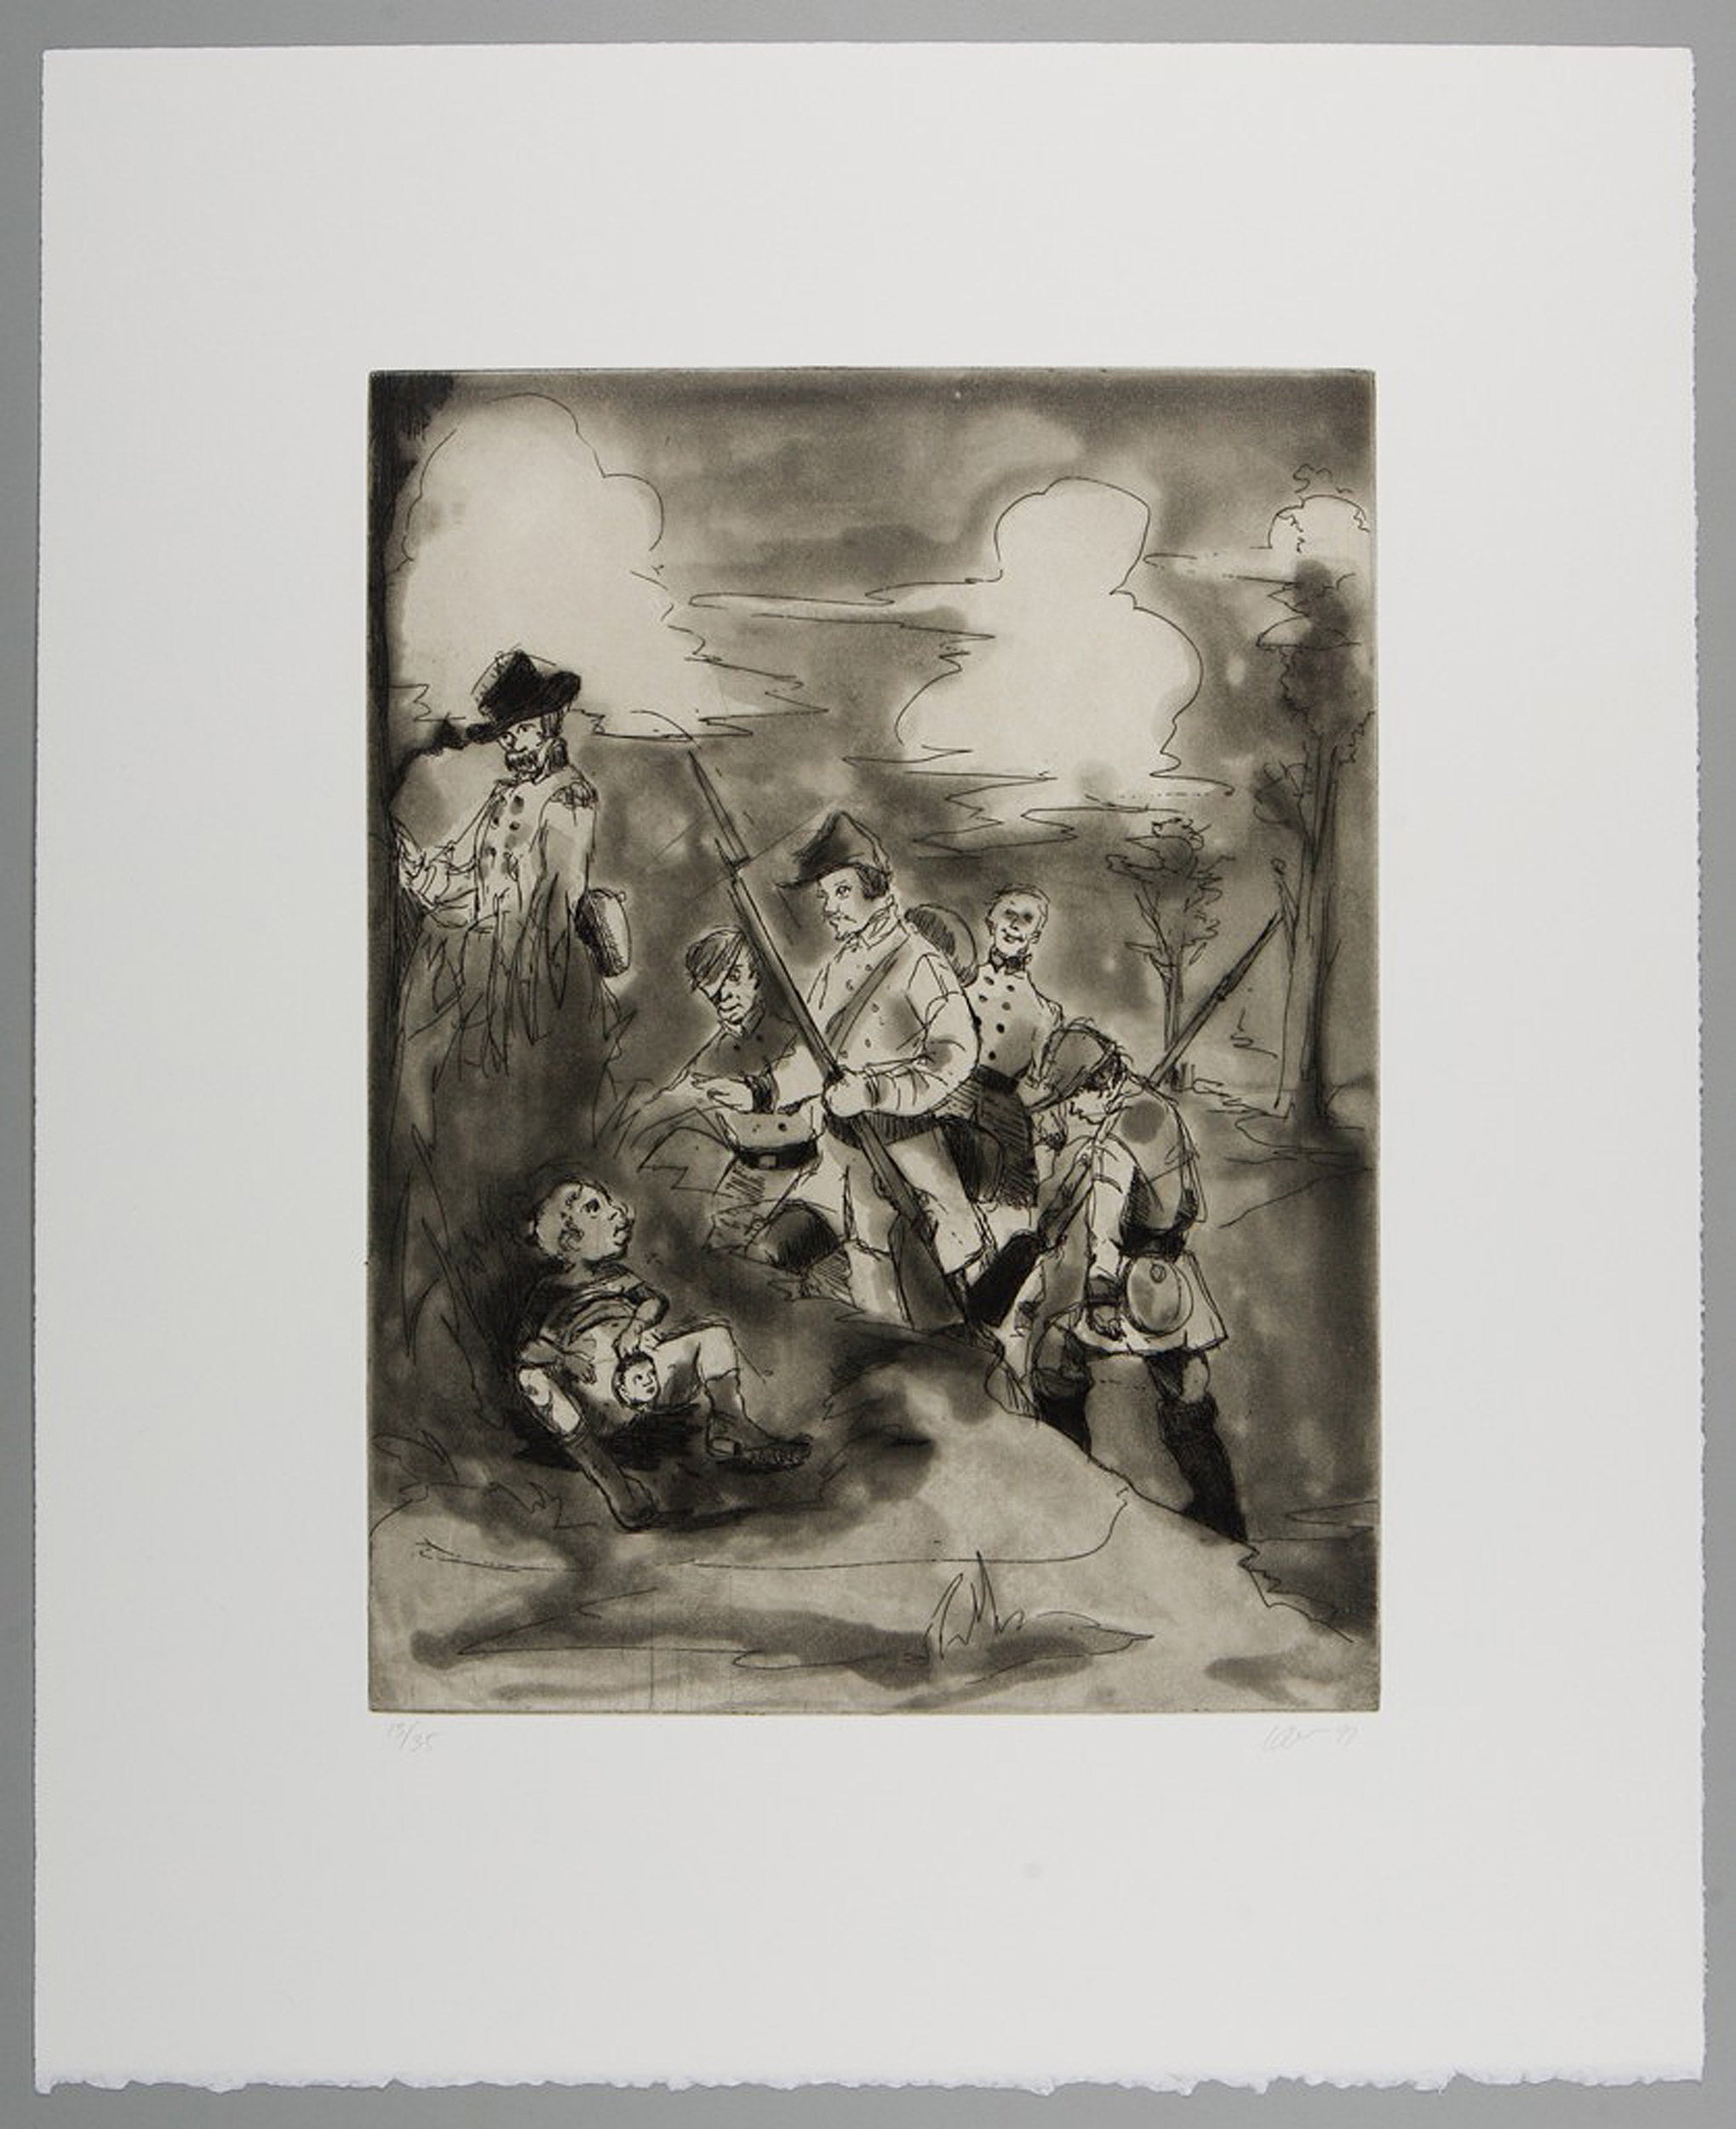 "Li'l Patch of Woods," etching and aquatint on chine collé mounted to medium weight, ivory wove paper by Kara Walker.